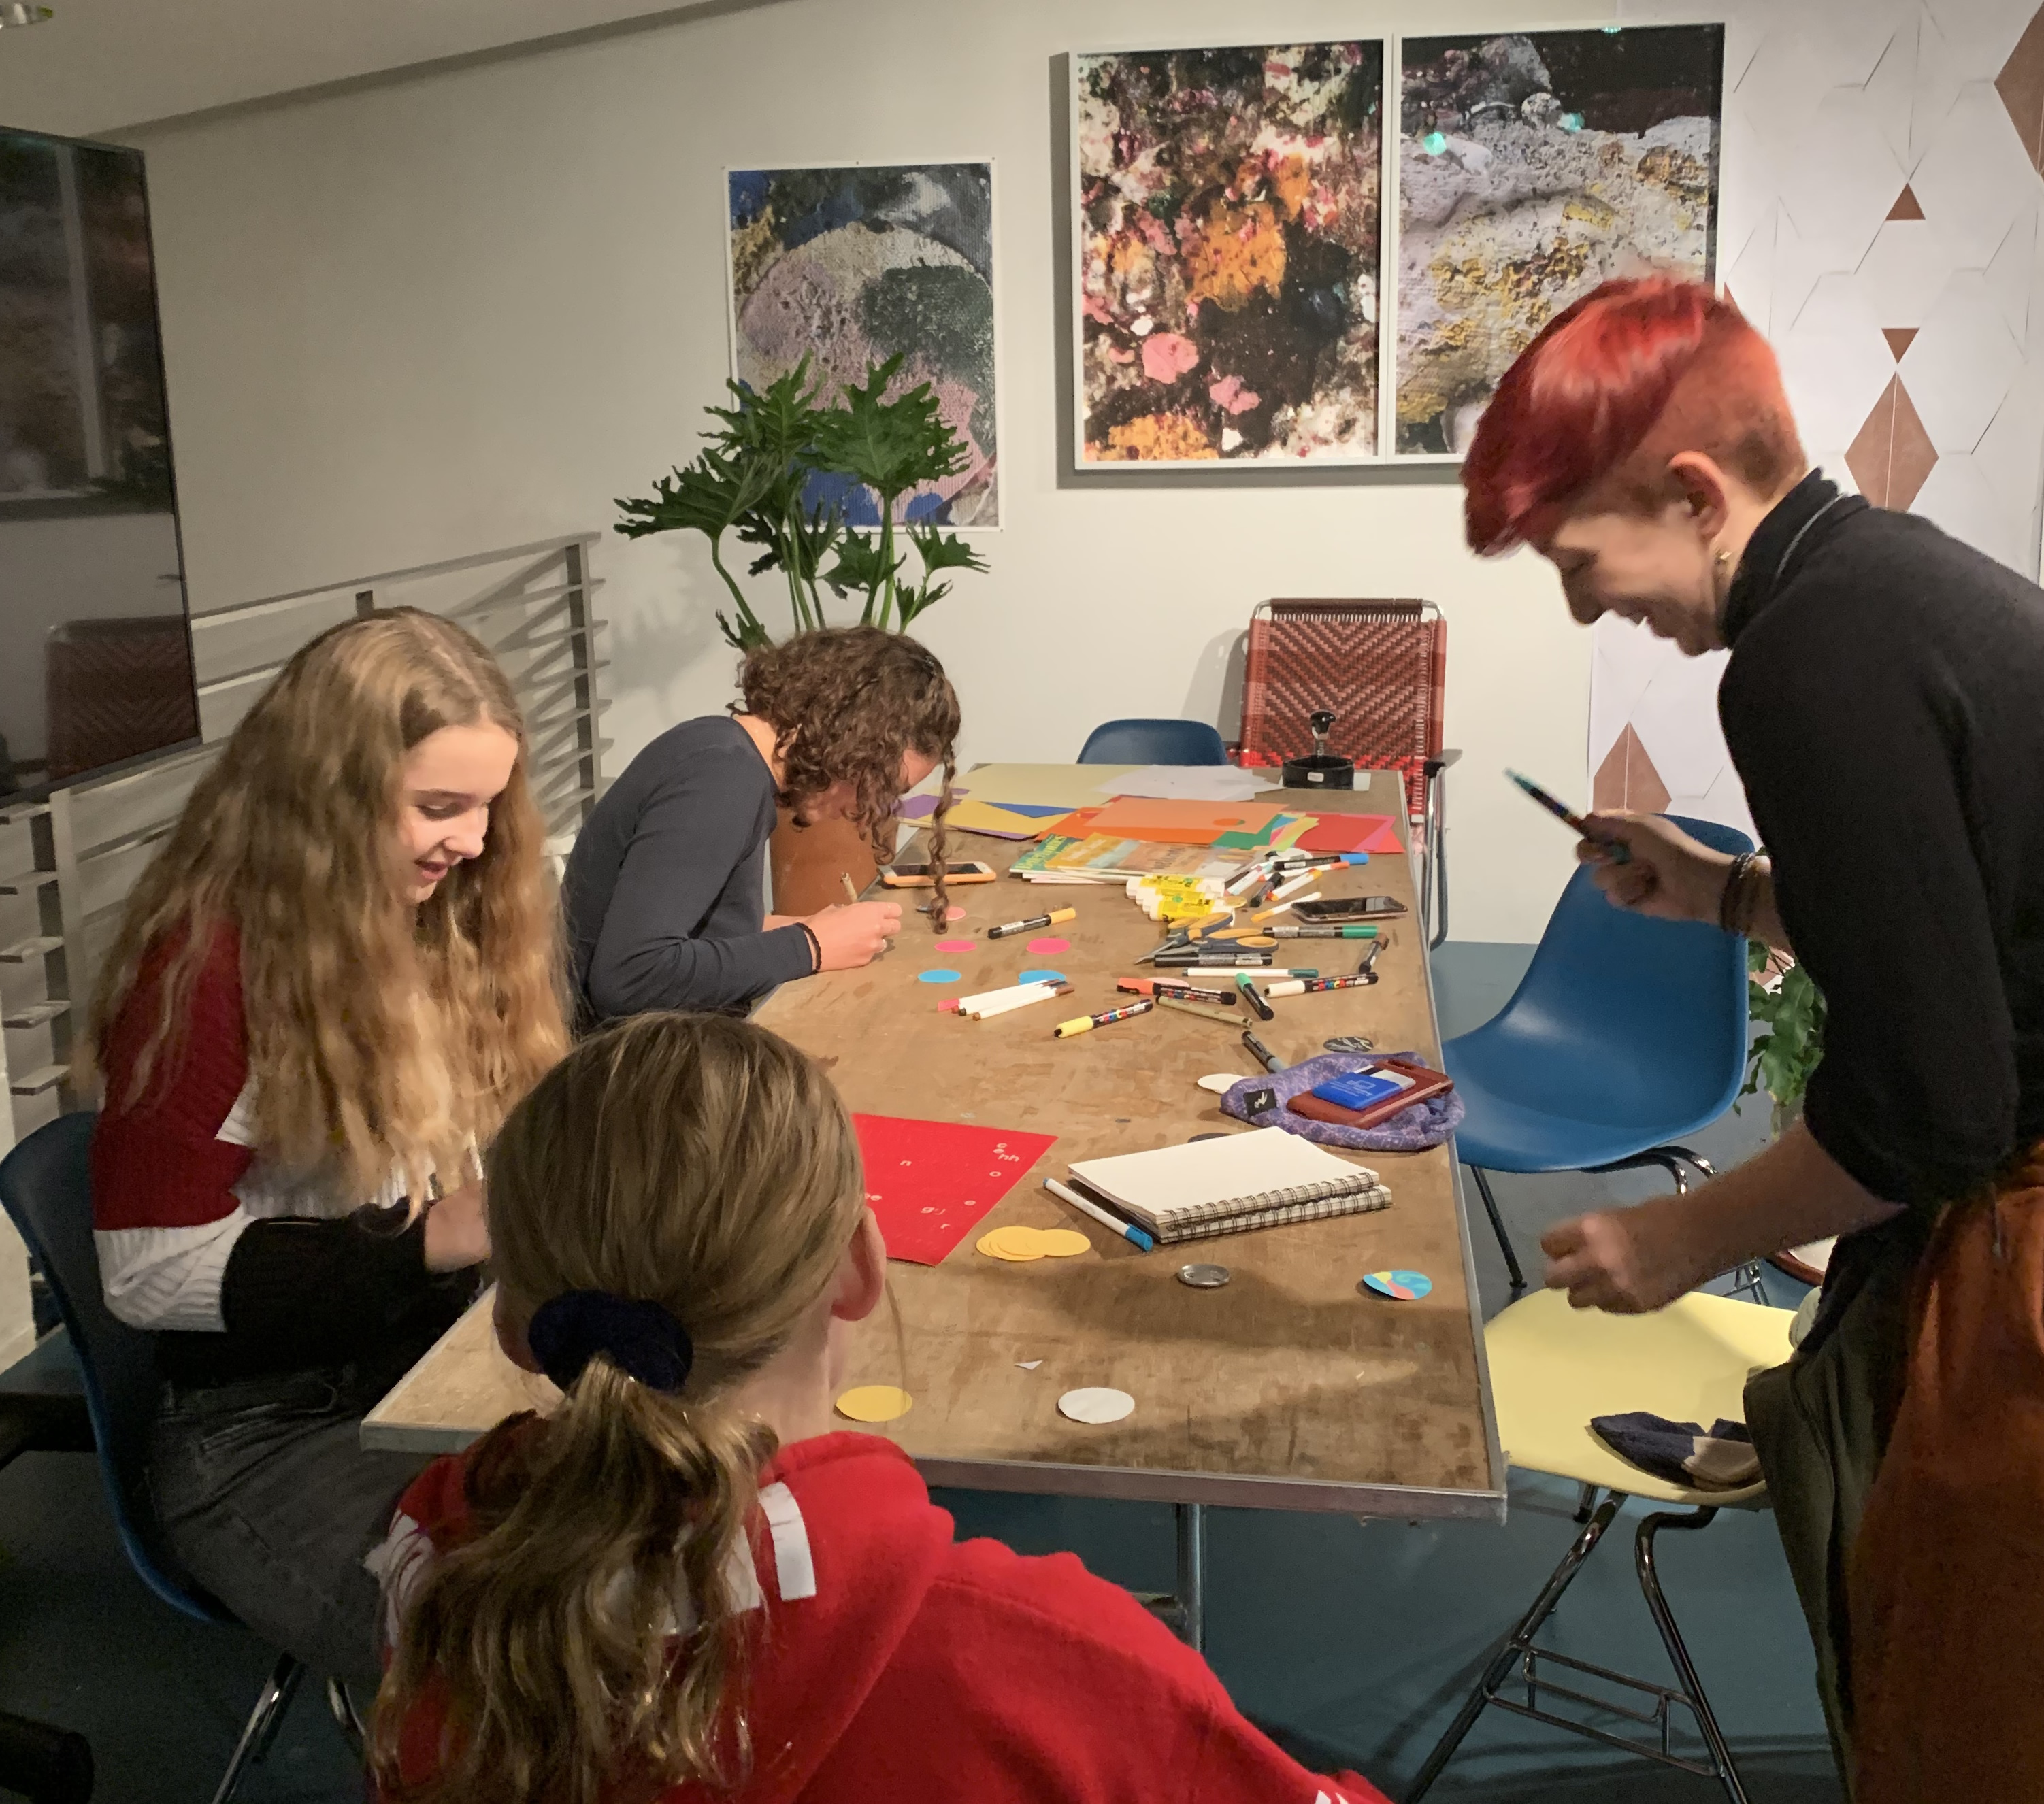 Skidmore College students gather at an IdeaLab Makerspace